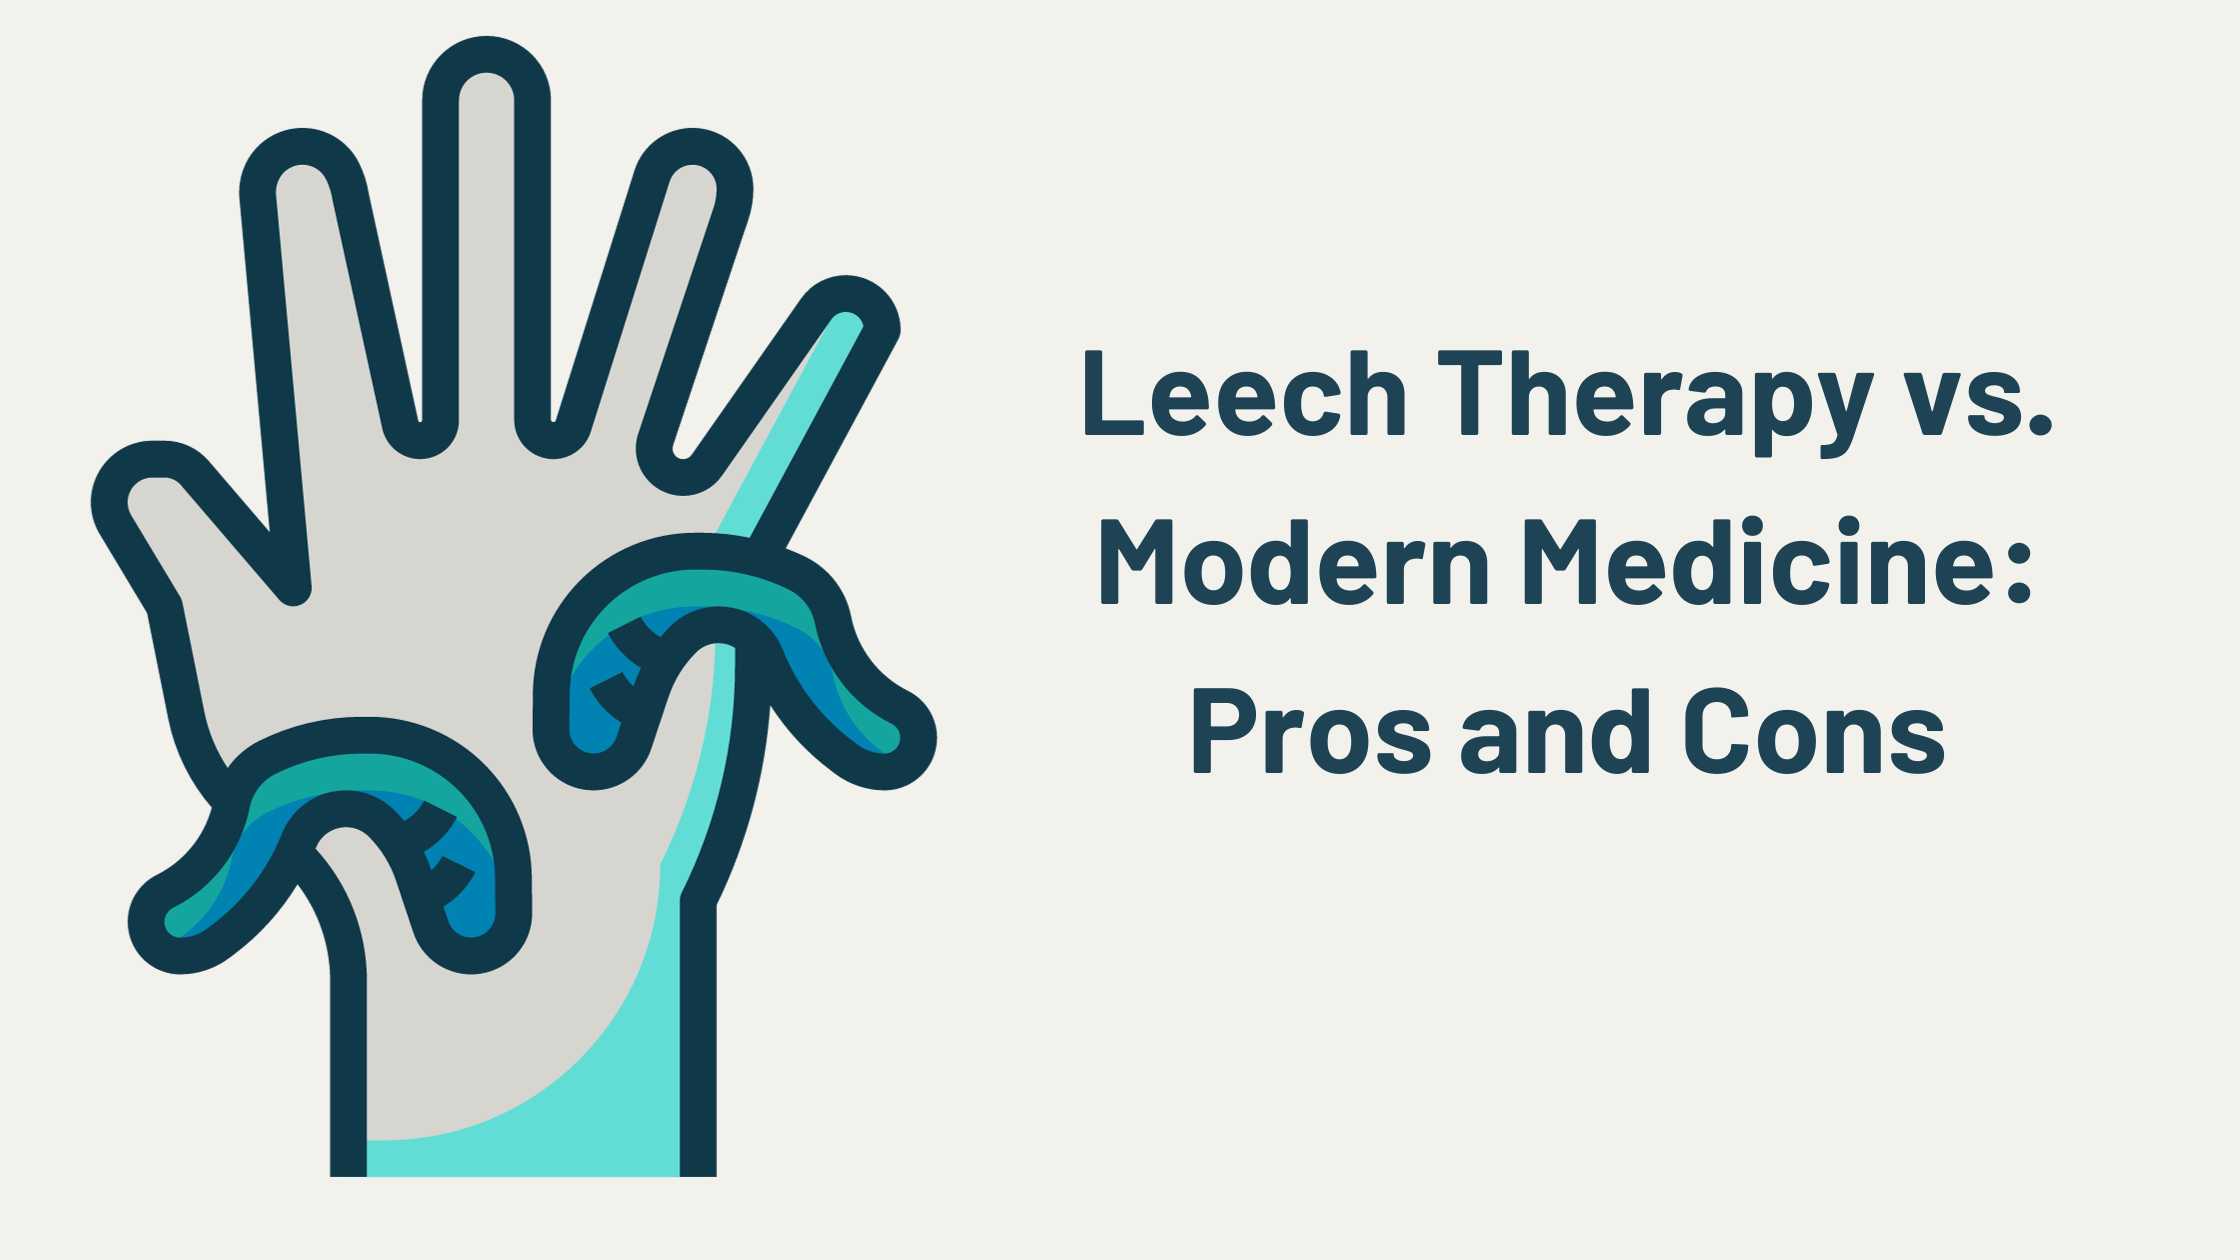 Leech Therapy vs. Modern Medicine: Pros and Cons